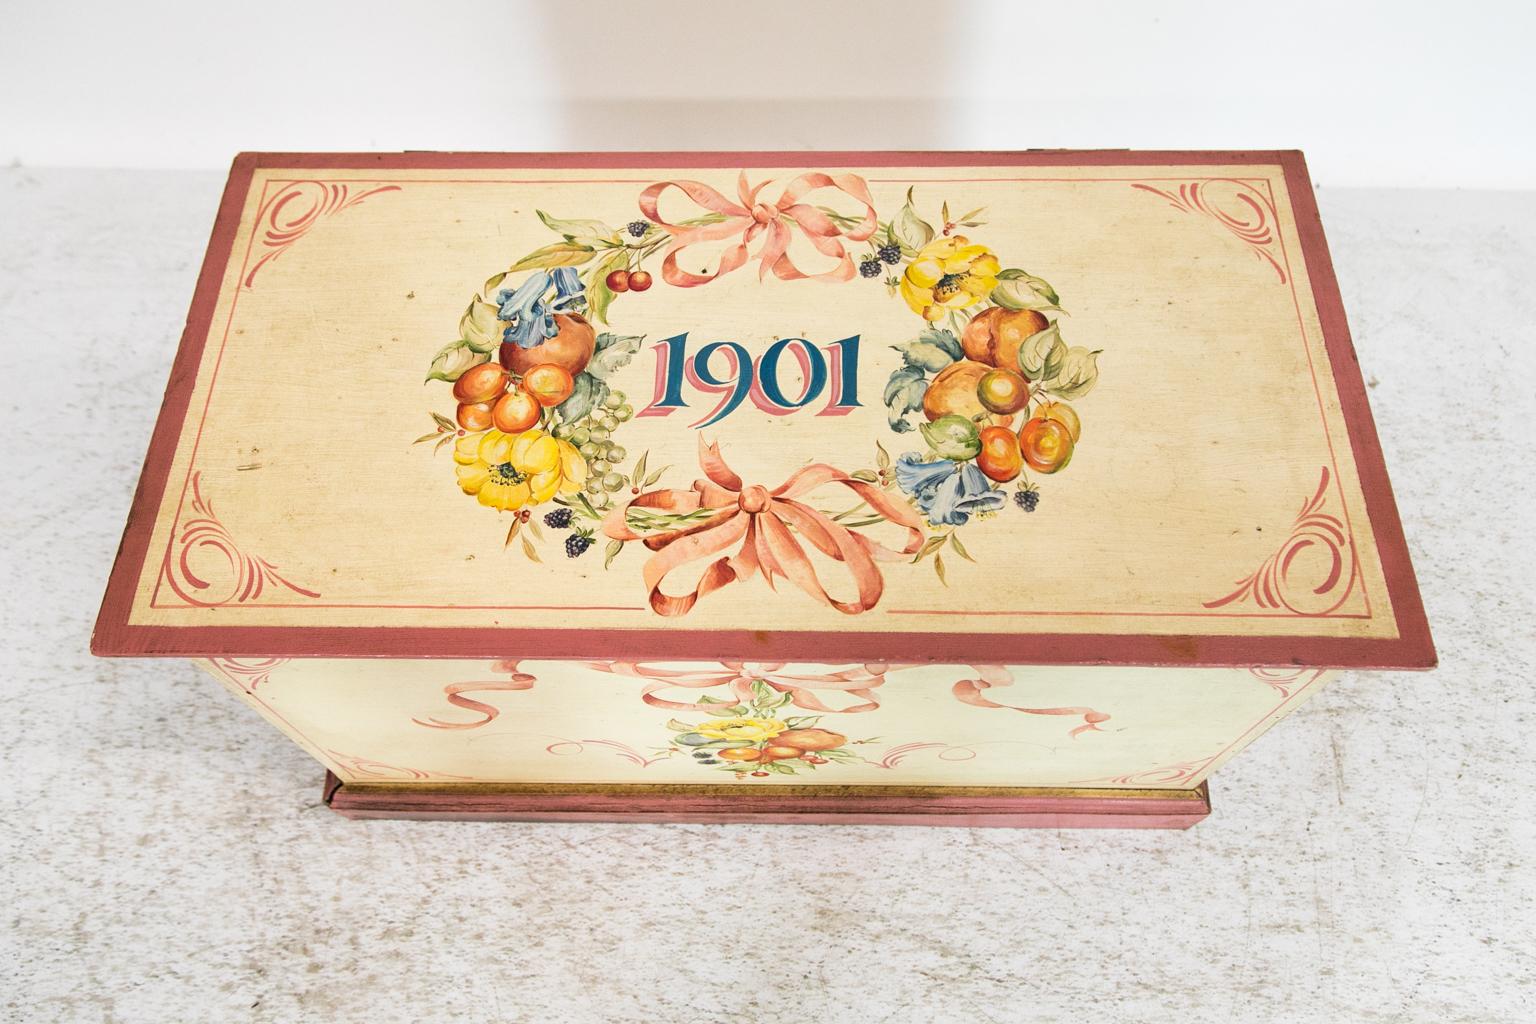 The top of this blanket chest is hand painted with a wreath of fruit, flowers, leaves, and bow tied ribbons. The front is painted with a bow tied ribbon suspending a spray of flowers, fruit, and leaves.
  